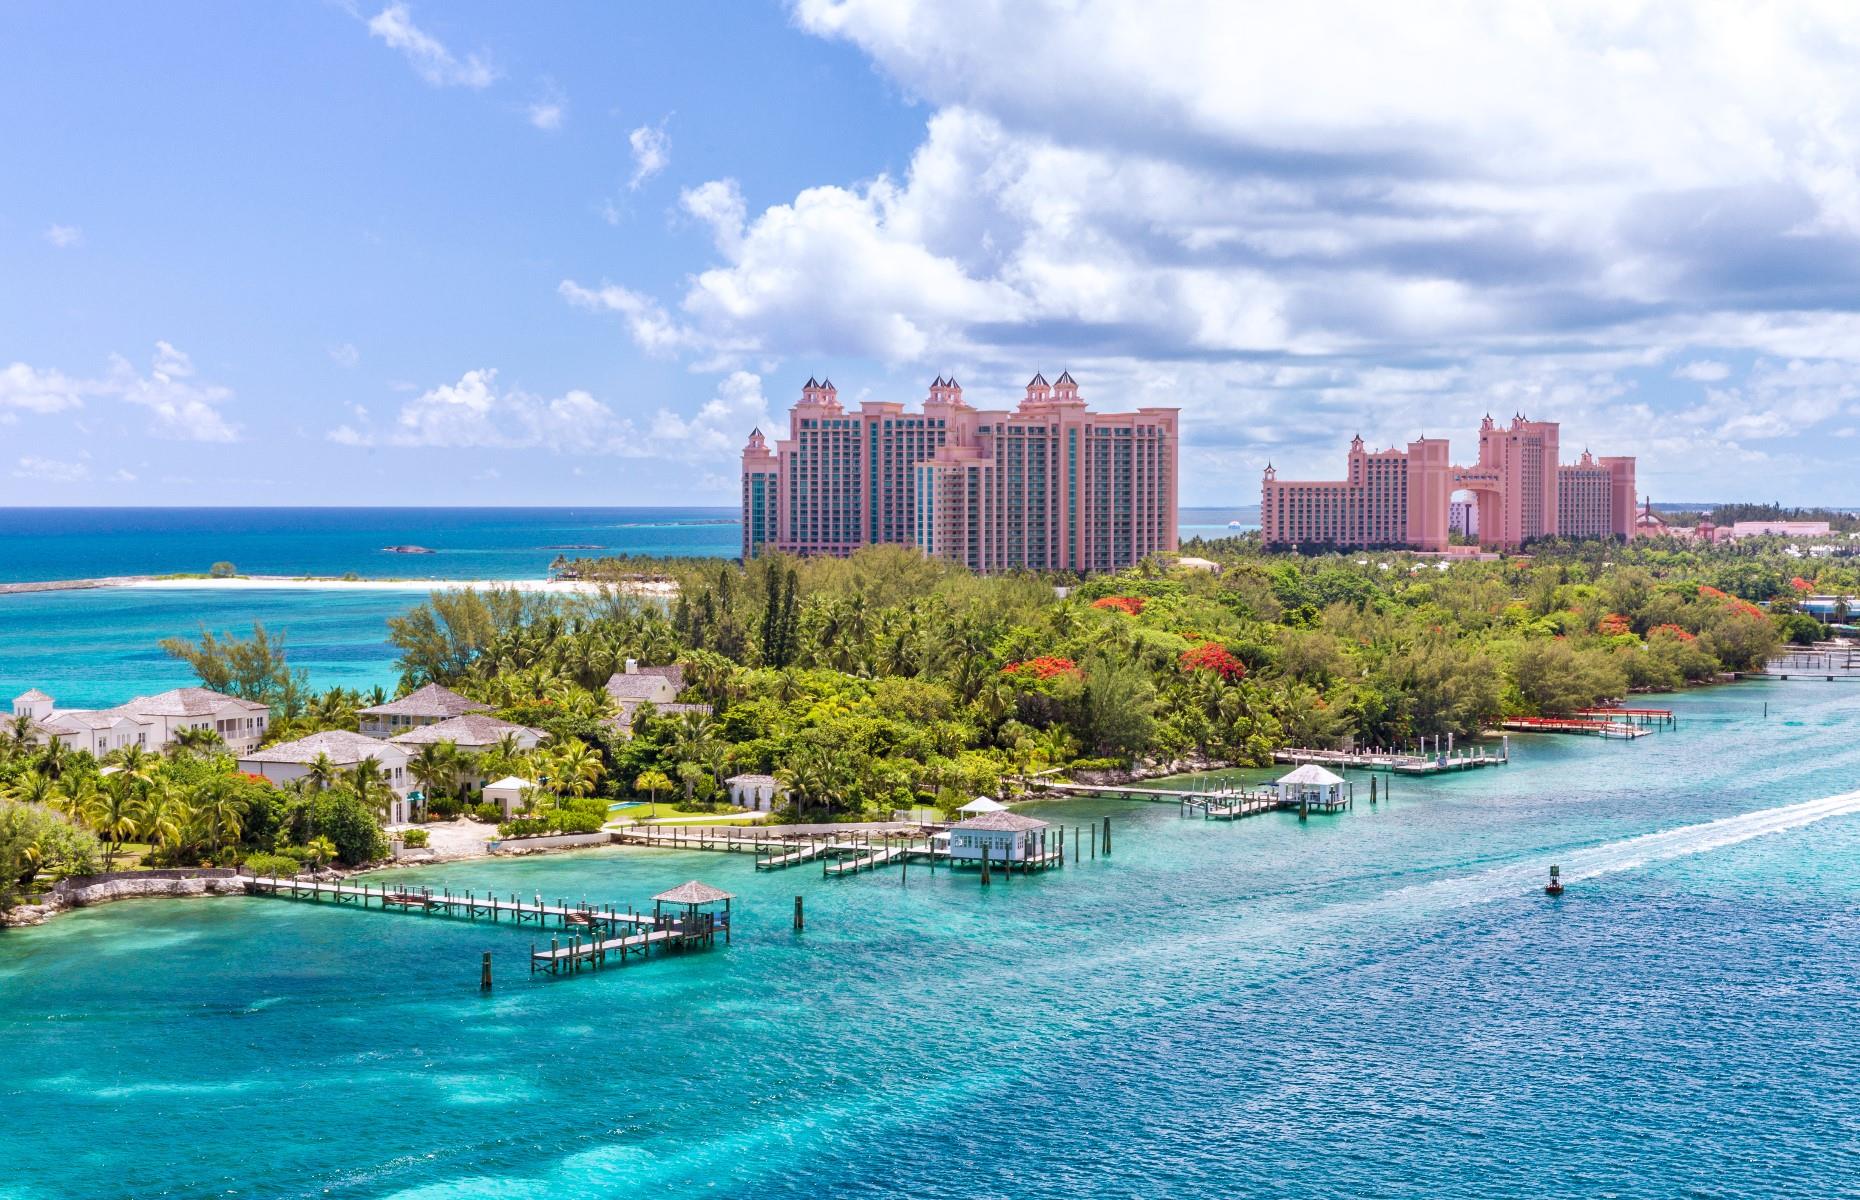 <p><strong>Index score: 88.27</strong></p>  <p>Ever daydream about escaping to the paradise that is the Bahamas? Well, unfortunately, island life comes at a cost. Much like Barbados, living in the Bahamas comes with logistical challenges that contribute to the high cost of living. Importing goods makes everything more expensive –and while other tropical locations, such as Barbados and Bermuda, have more expensive groceries, prices here are steeper due to a competitive housing market and high import taxes.</p>